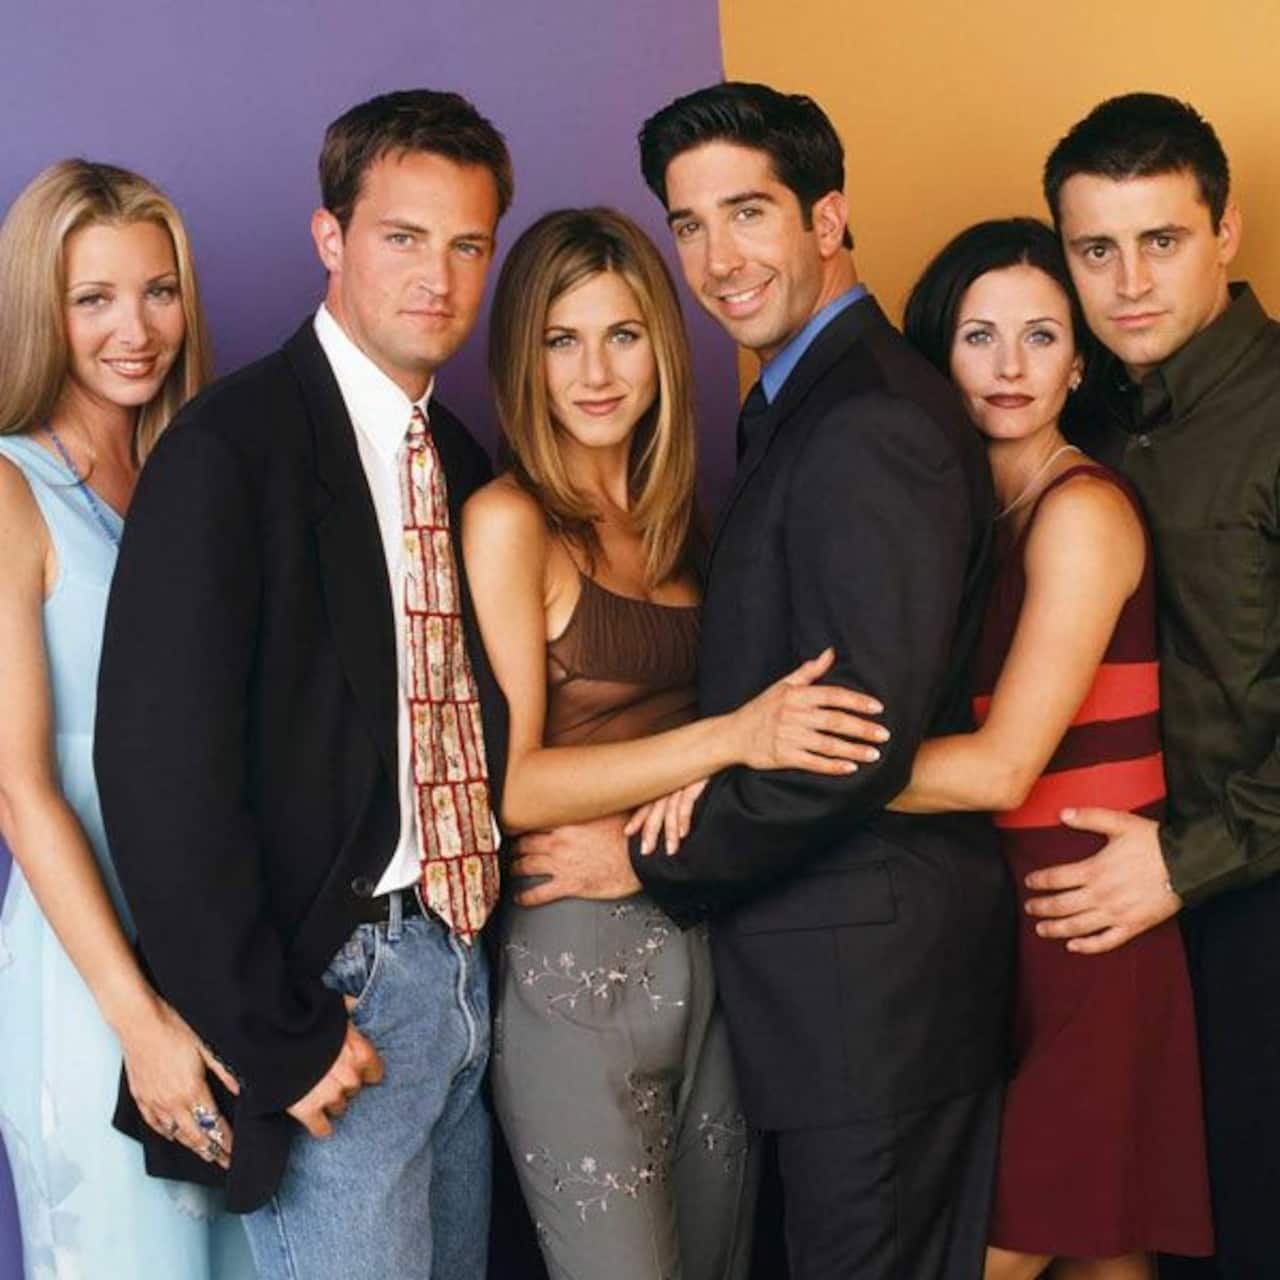 Friends Reunion Special on the cards for one night only